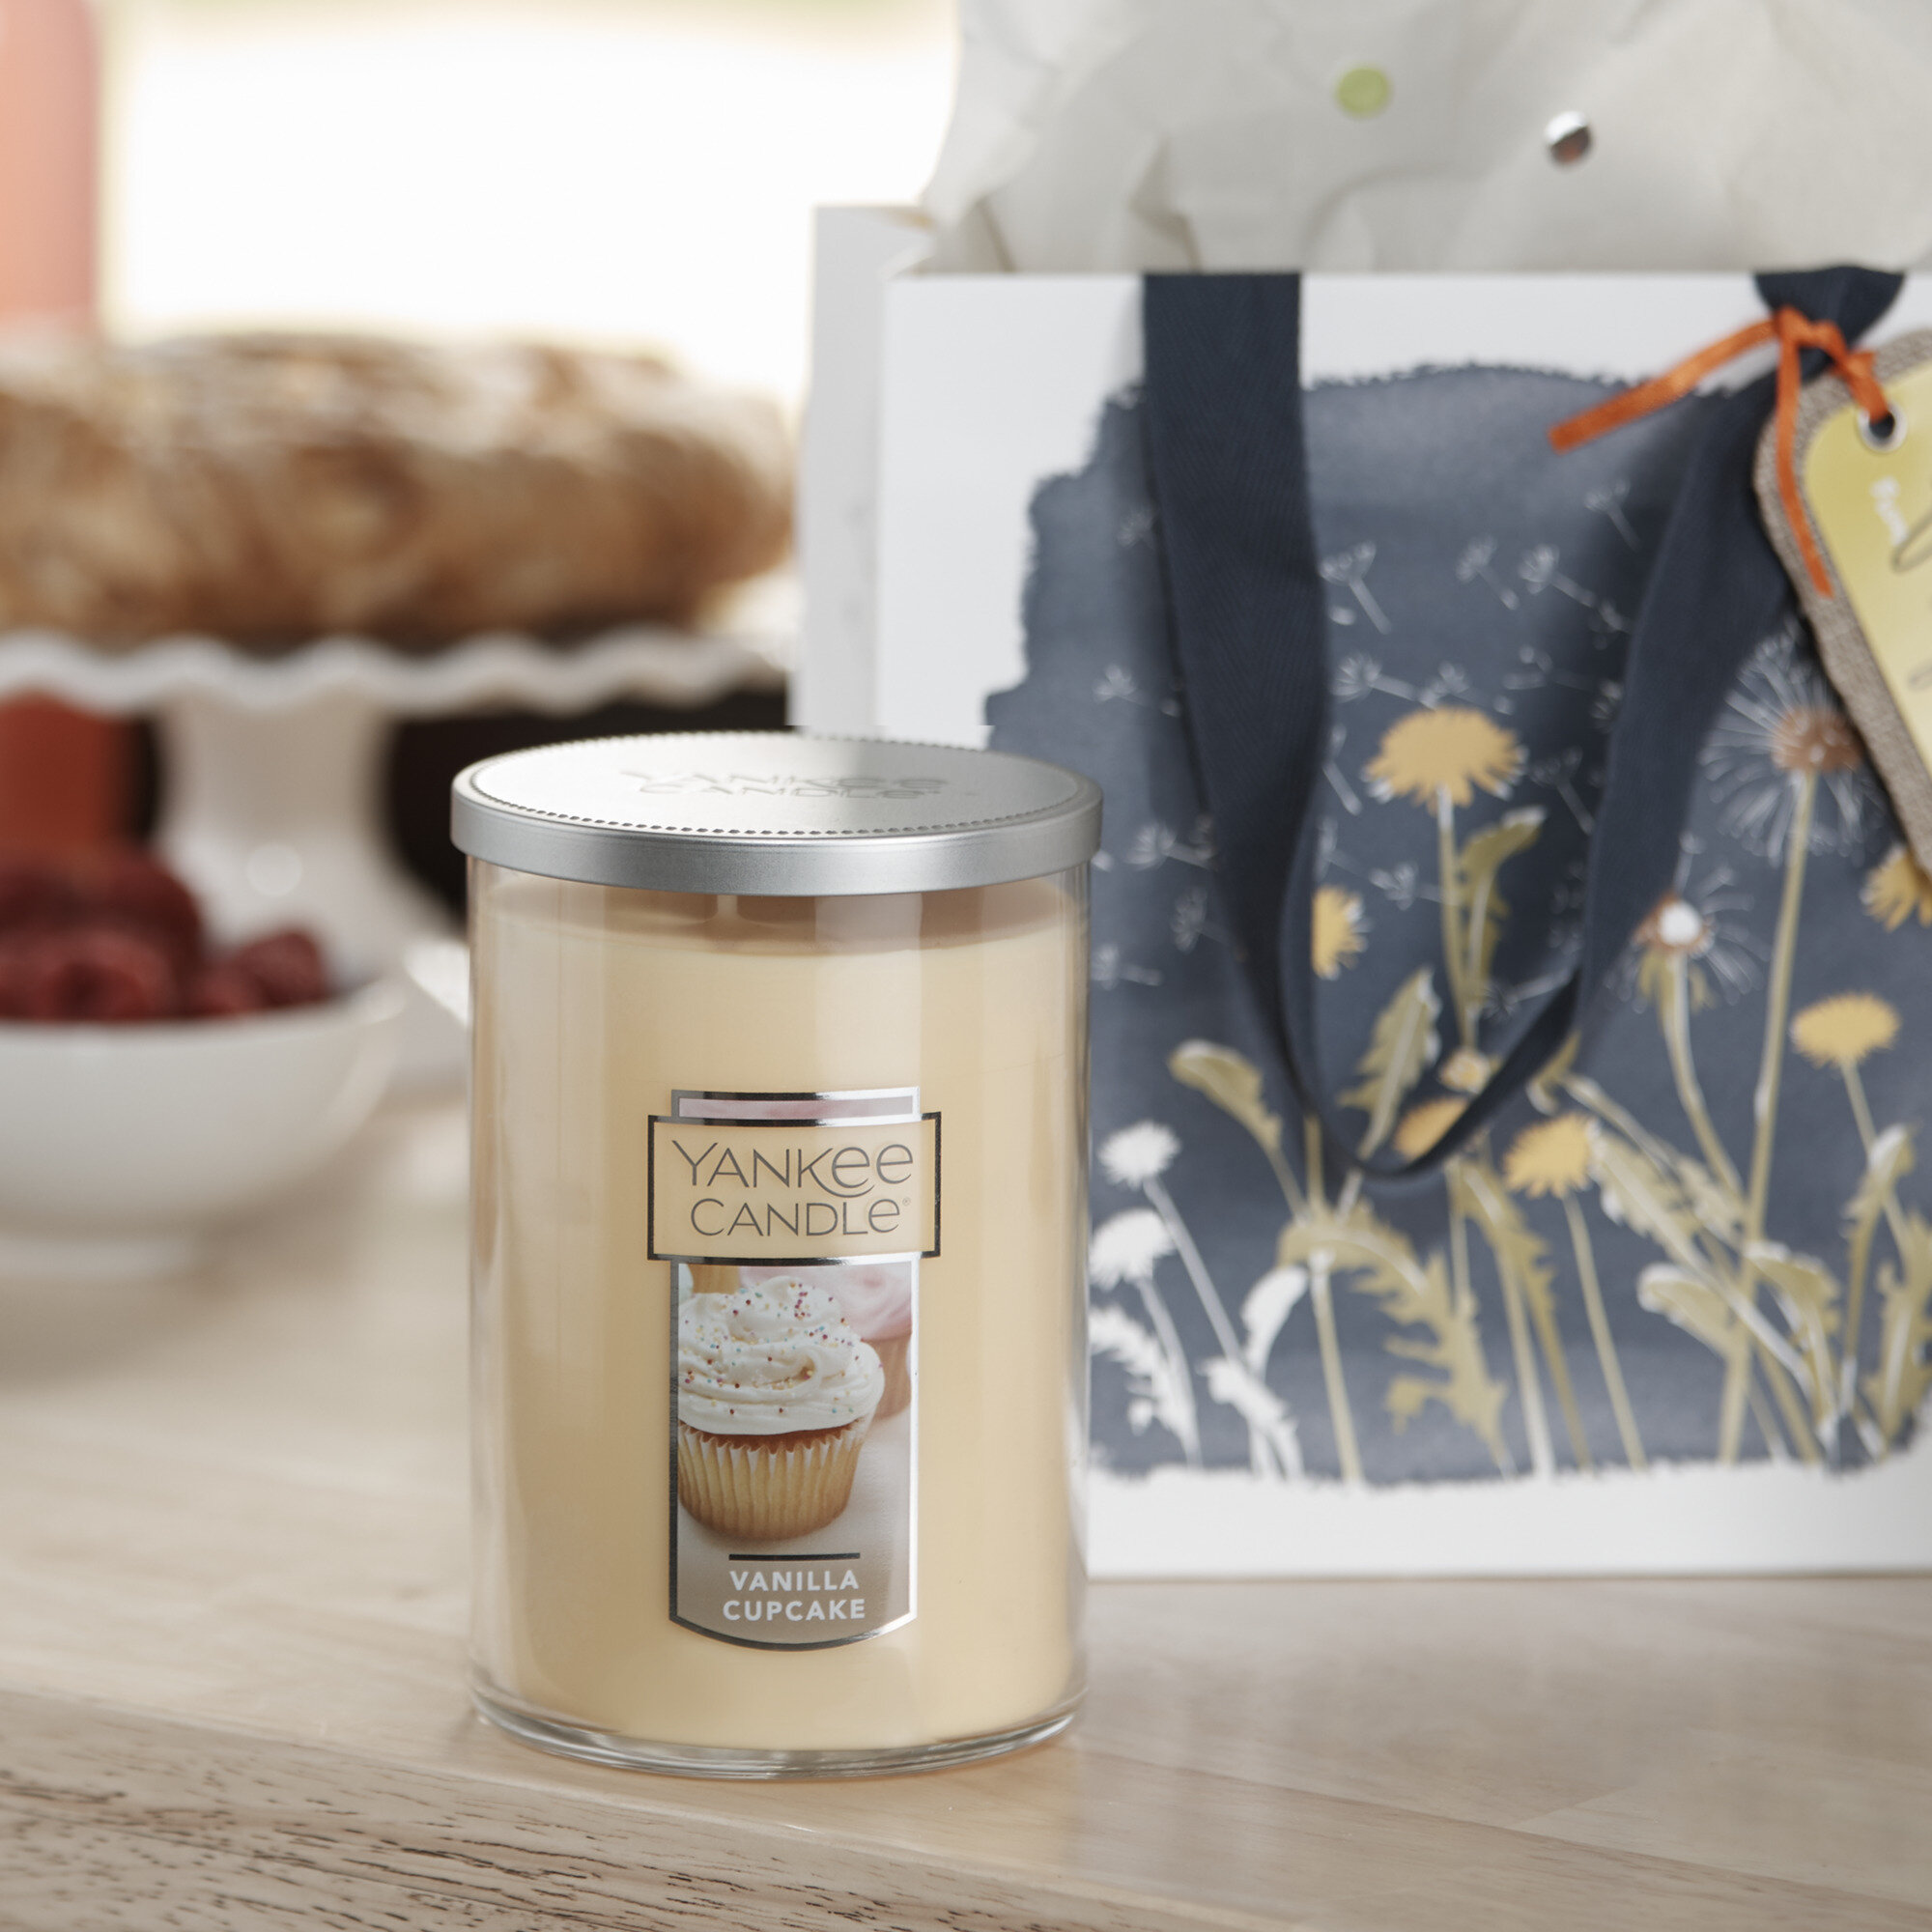 The Top 25 Best Yankee Candle Scents Ranked